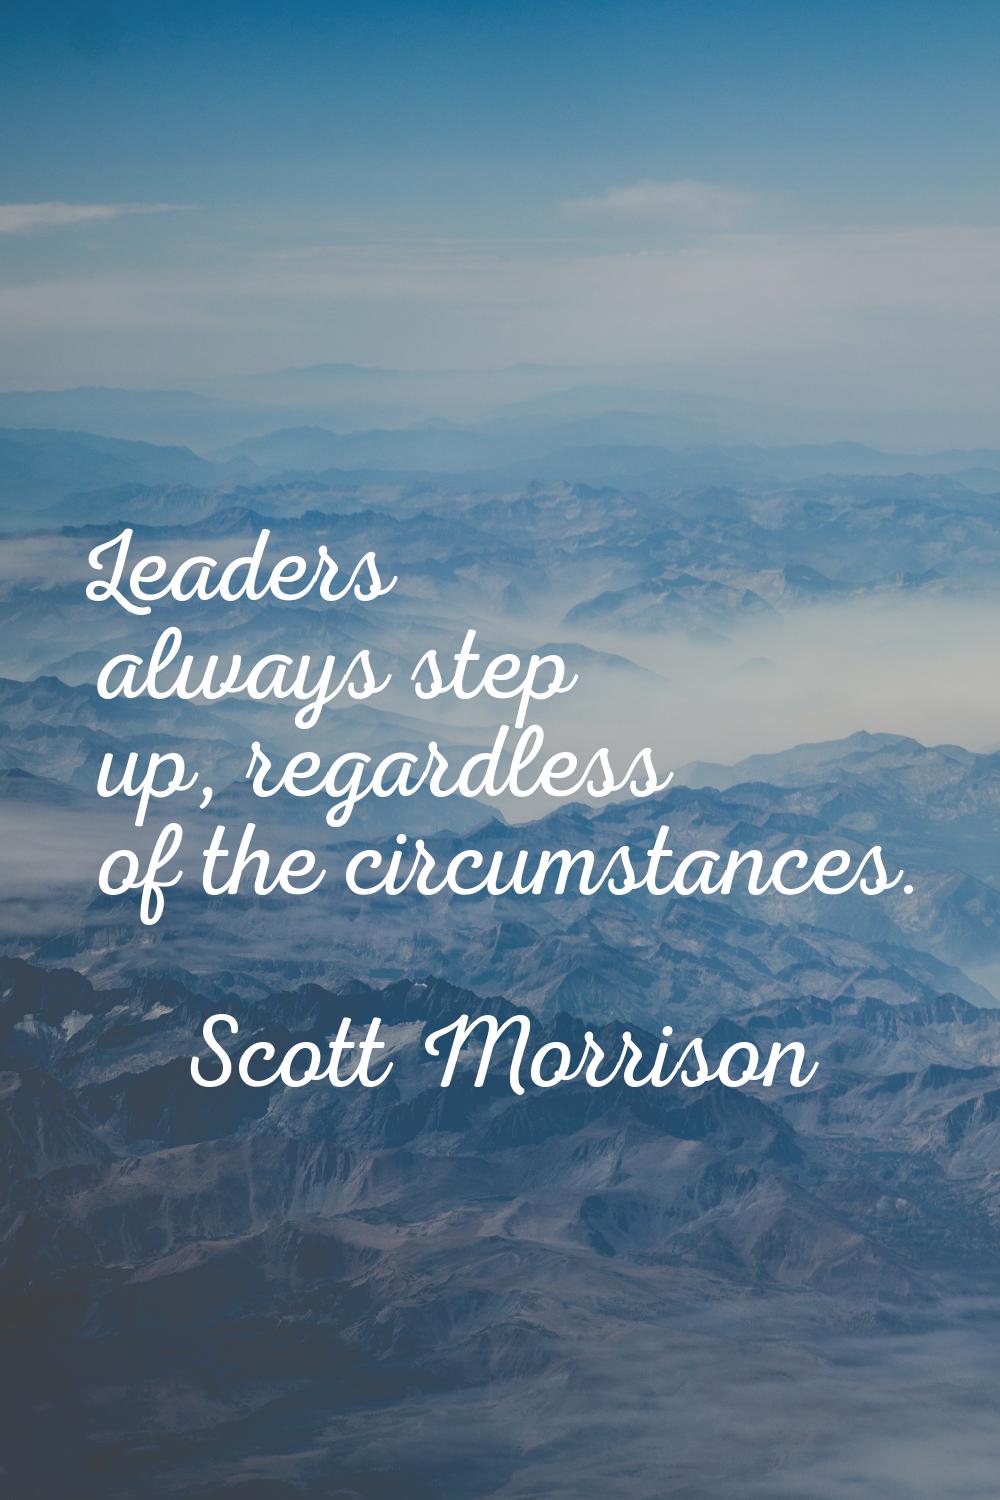 Leaders always step up, regardless of the circumstances.